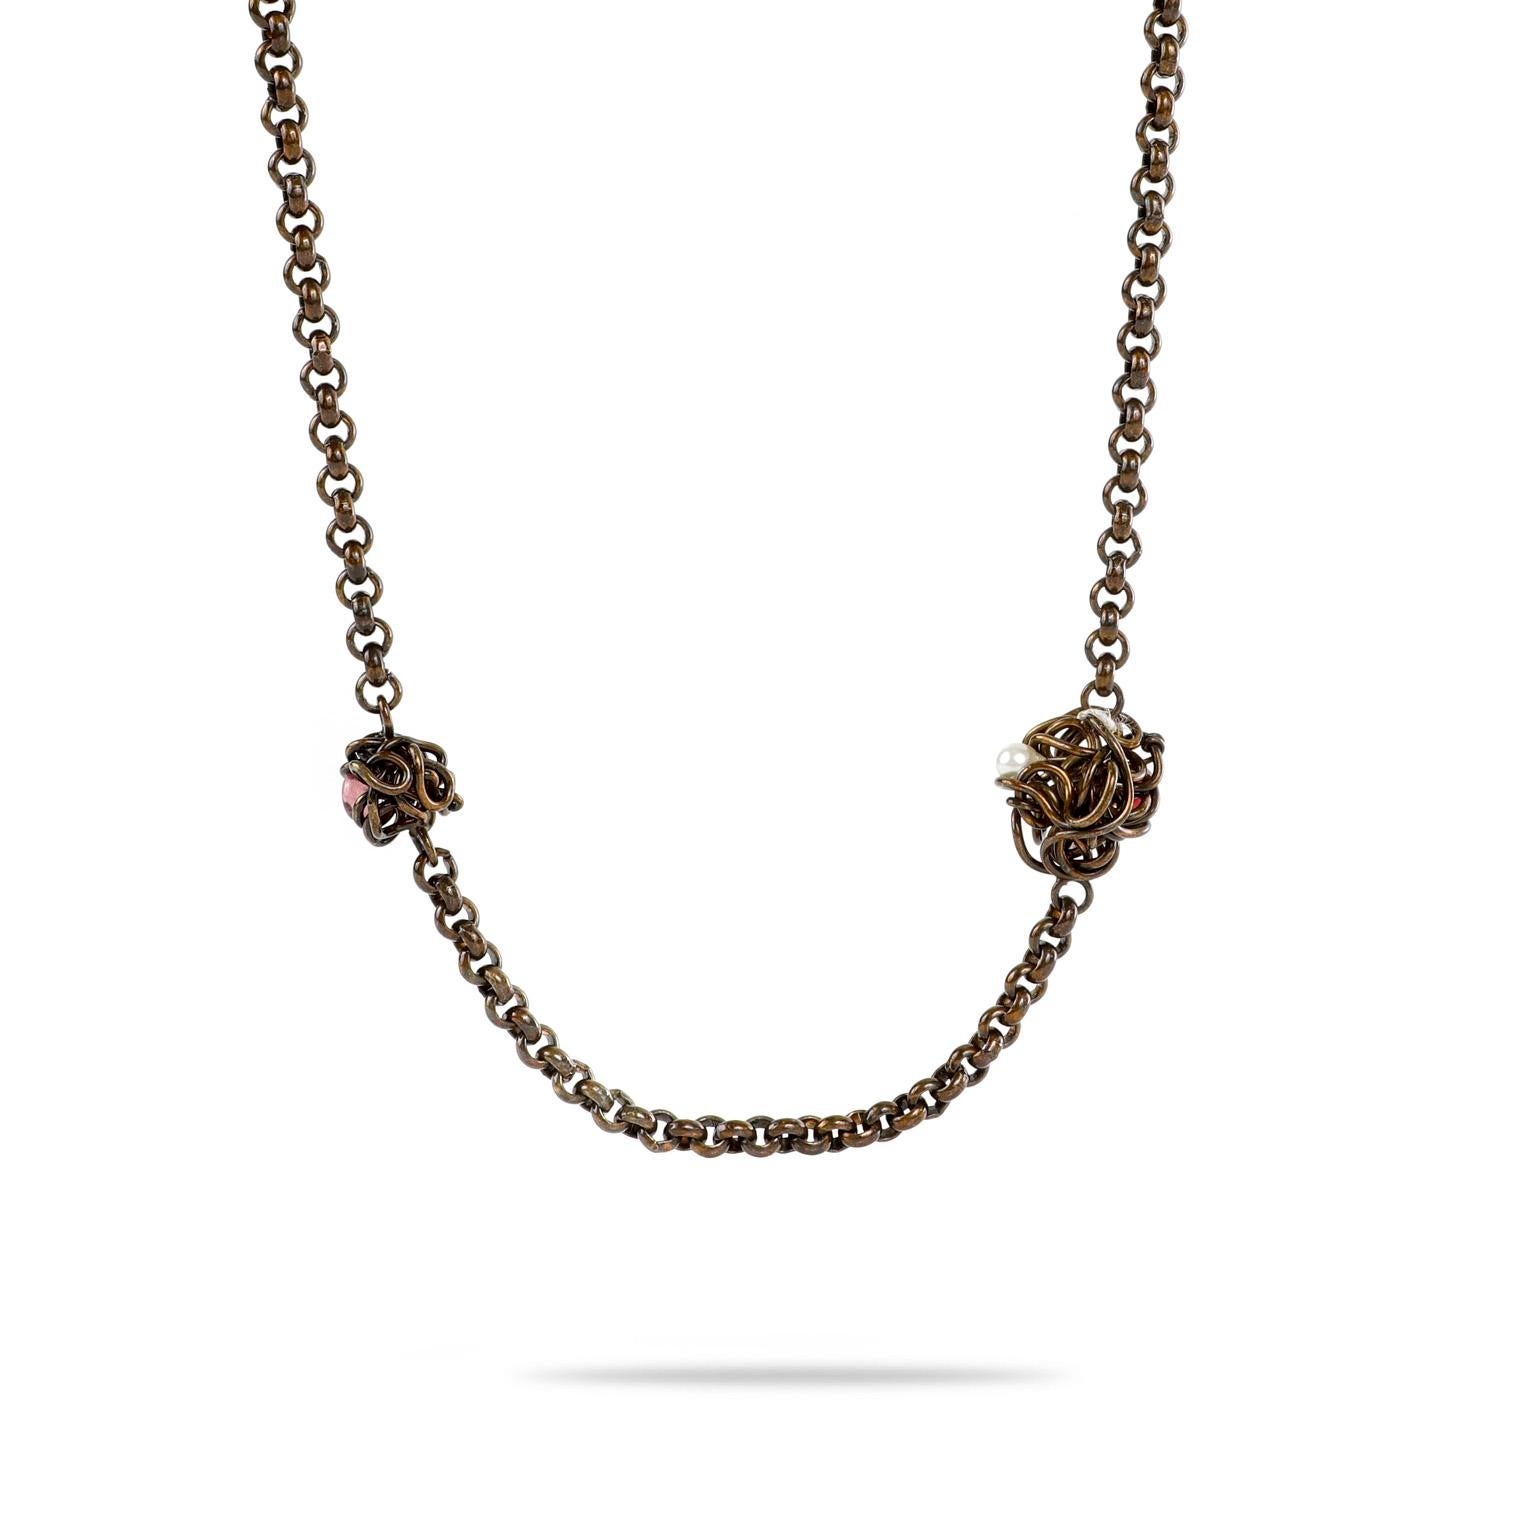 This authentic Chanel Bronze Bird’s Nest Necklace is in excellent condition.  Uniquely finished with a bronze patina, this long necklace is adorned with mini nests.  Each cradling its own glass gemstone “egg.”  Box or pouch included.

PBF 12391